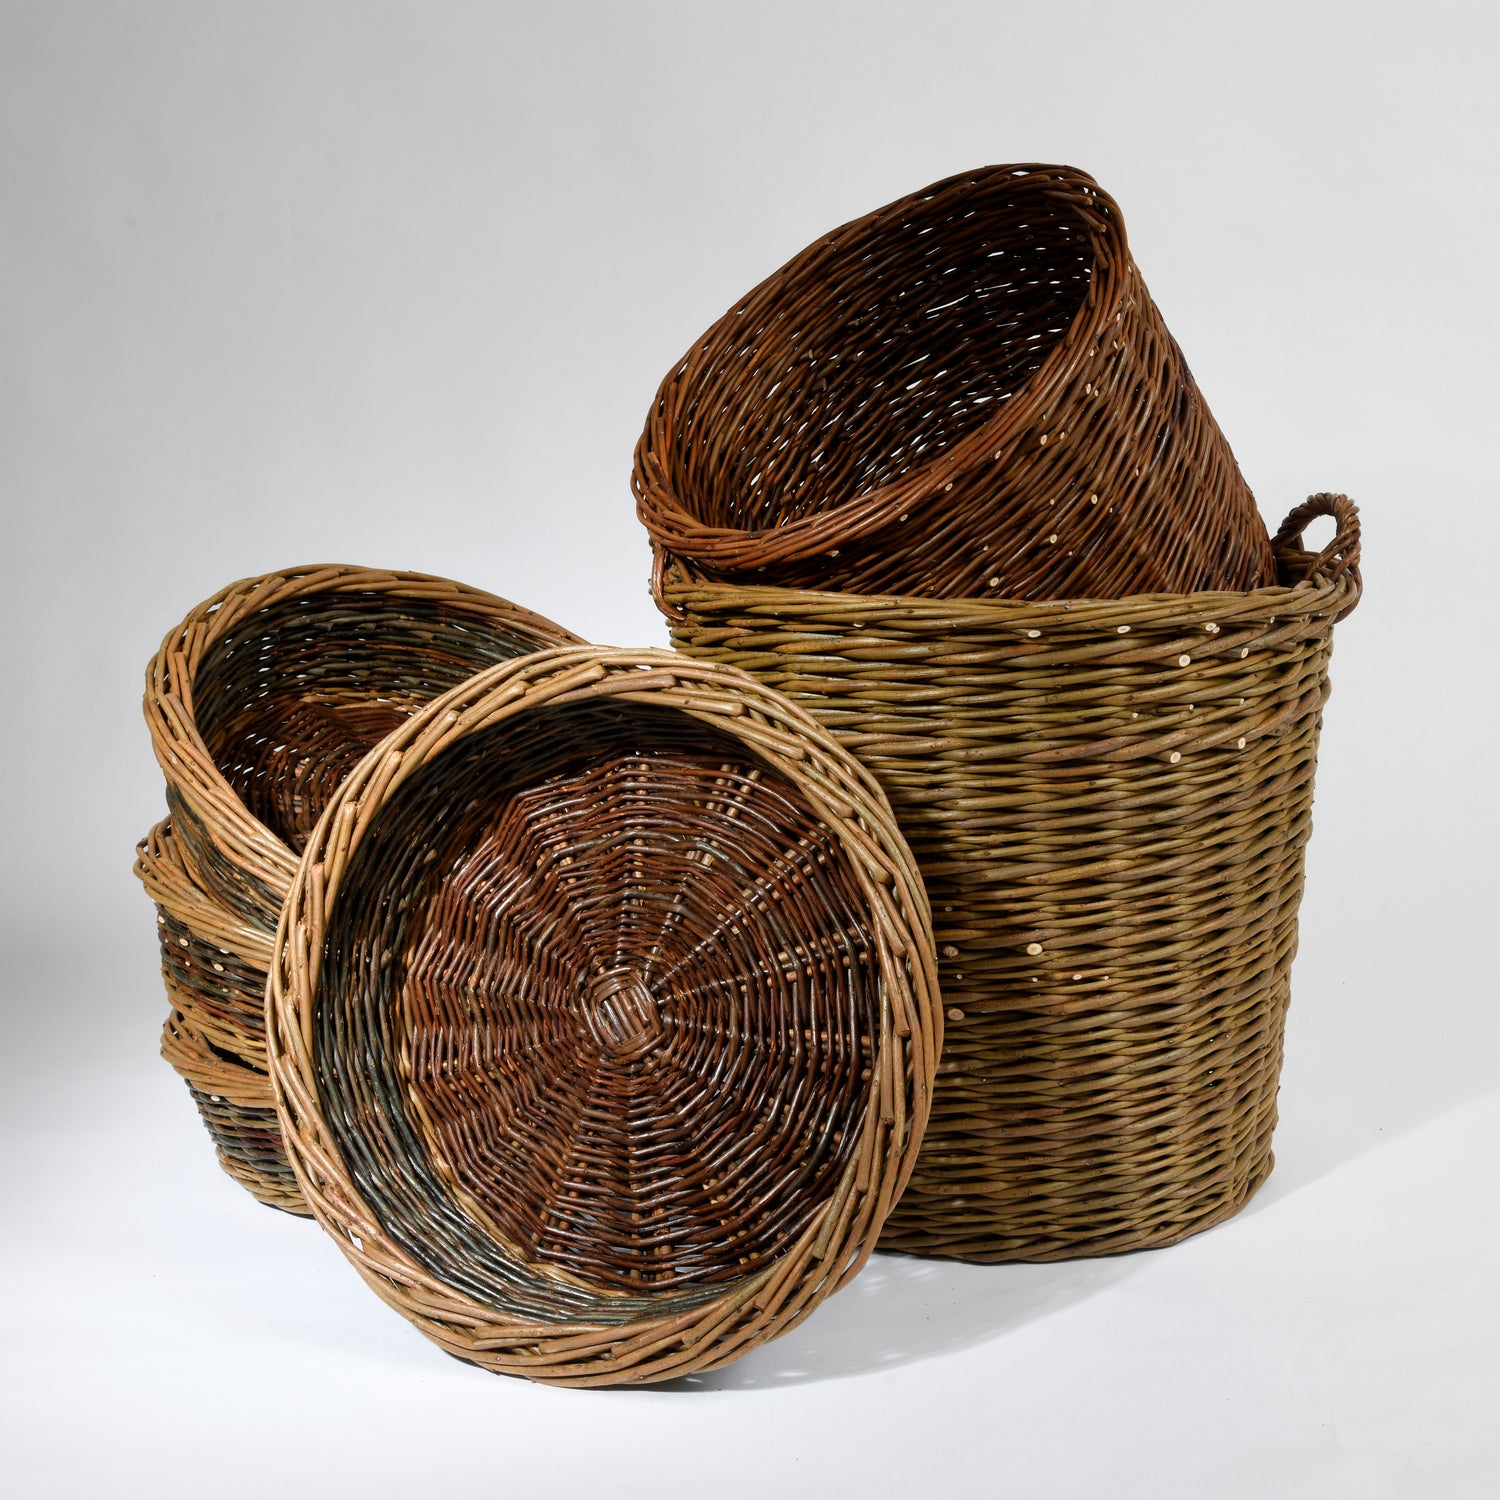 Hand crafted baskets, local, sustainable, authentic and beautiful.